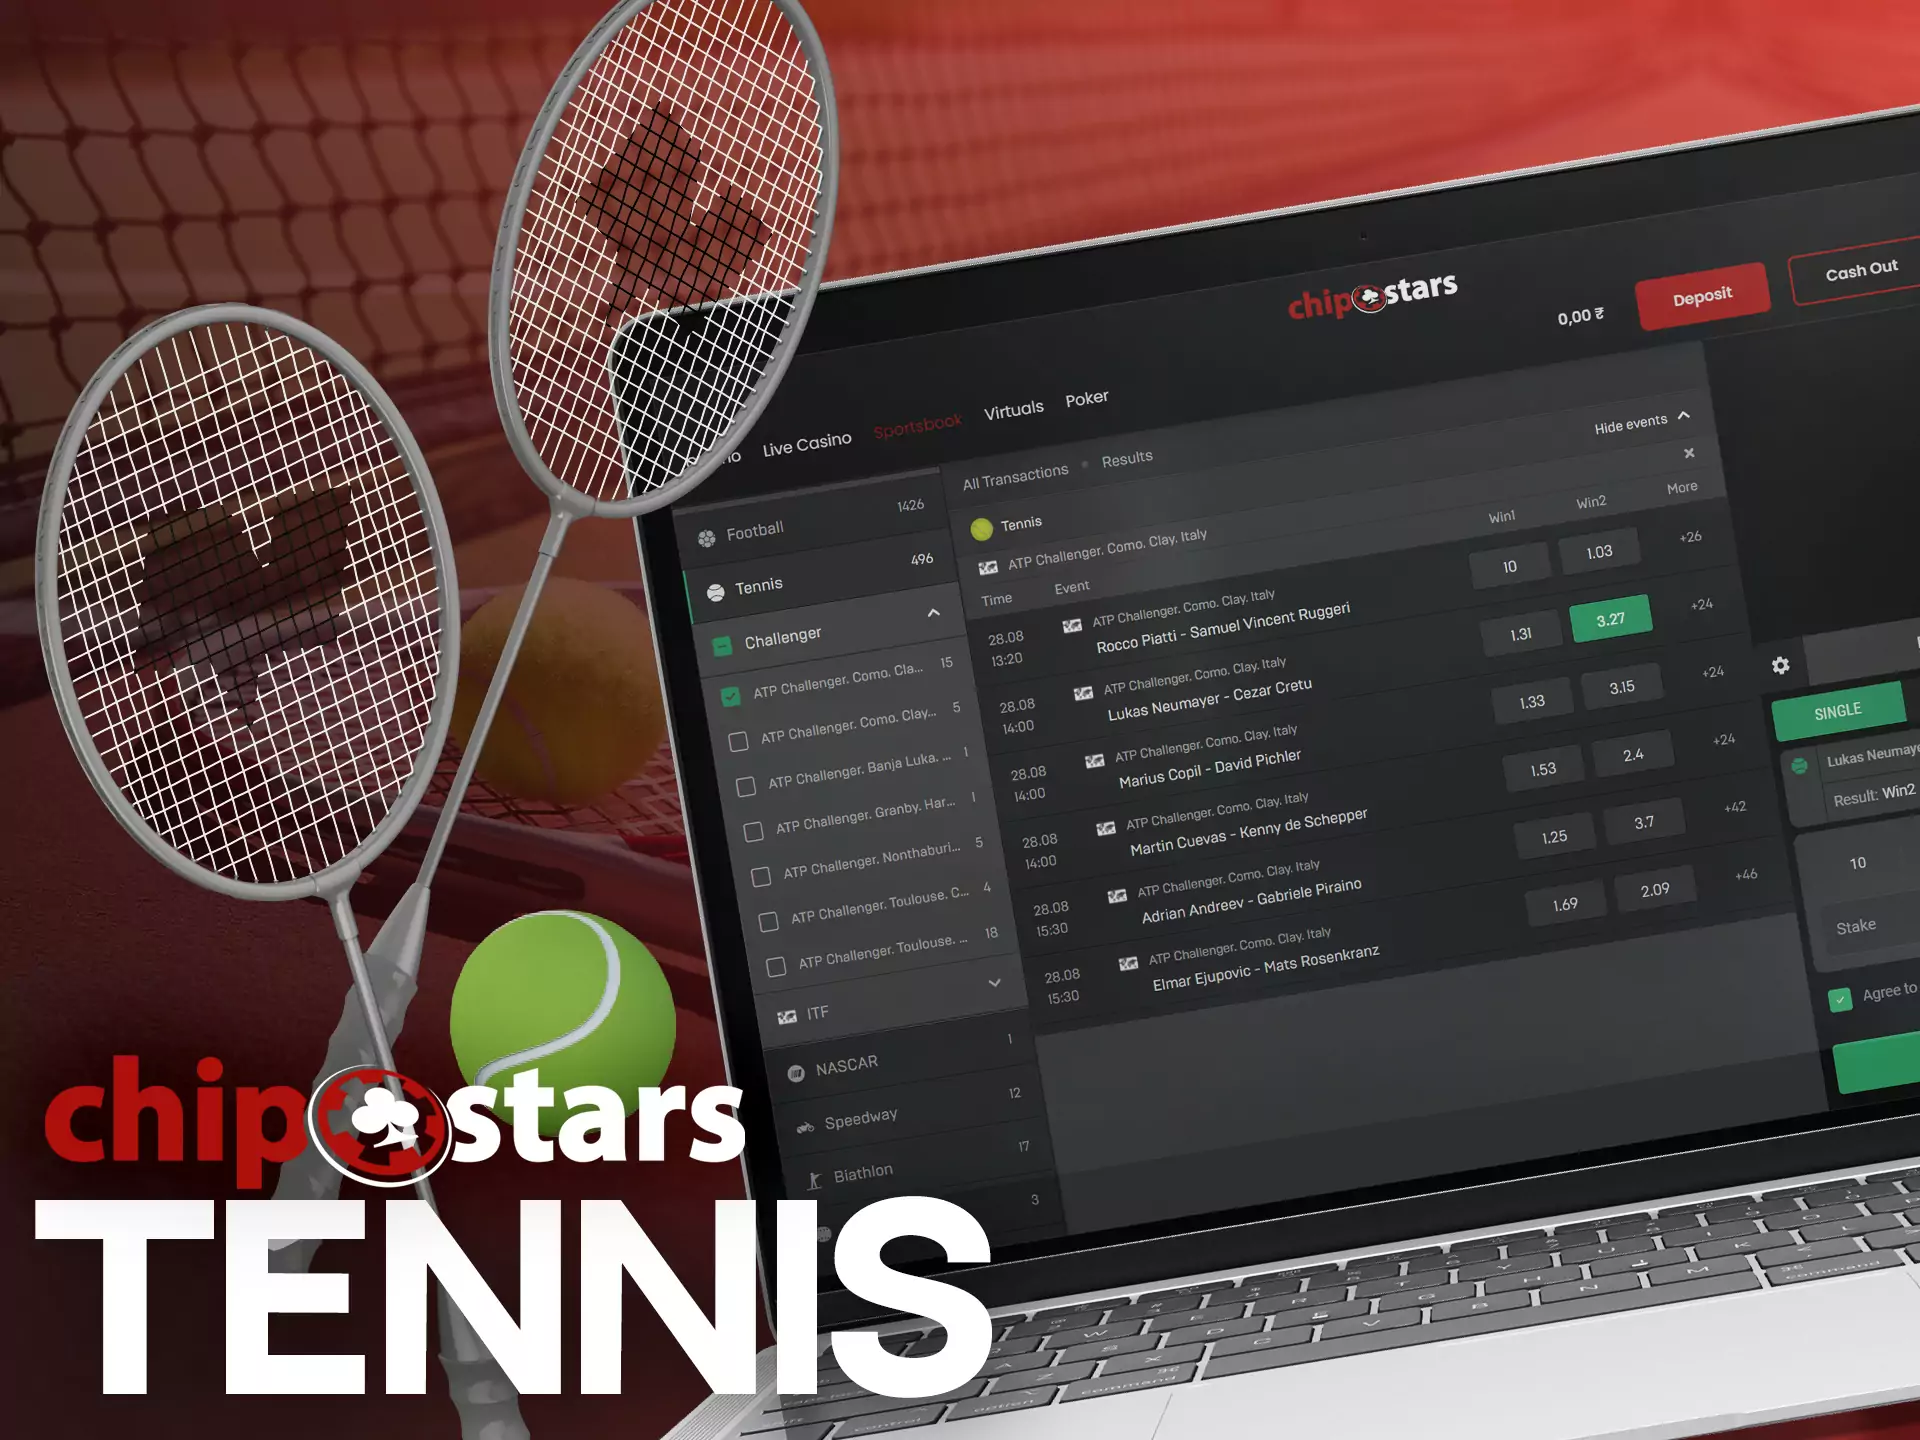 In the line and live sections, you find all the available tennis matches on Chipstars.